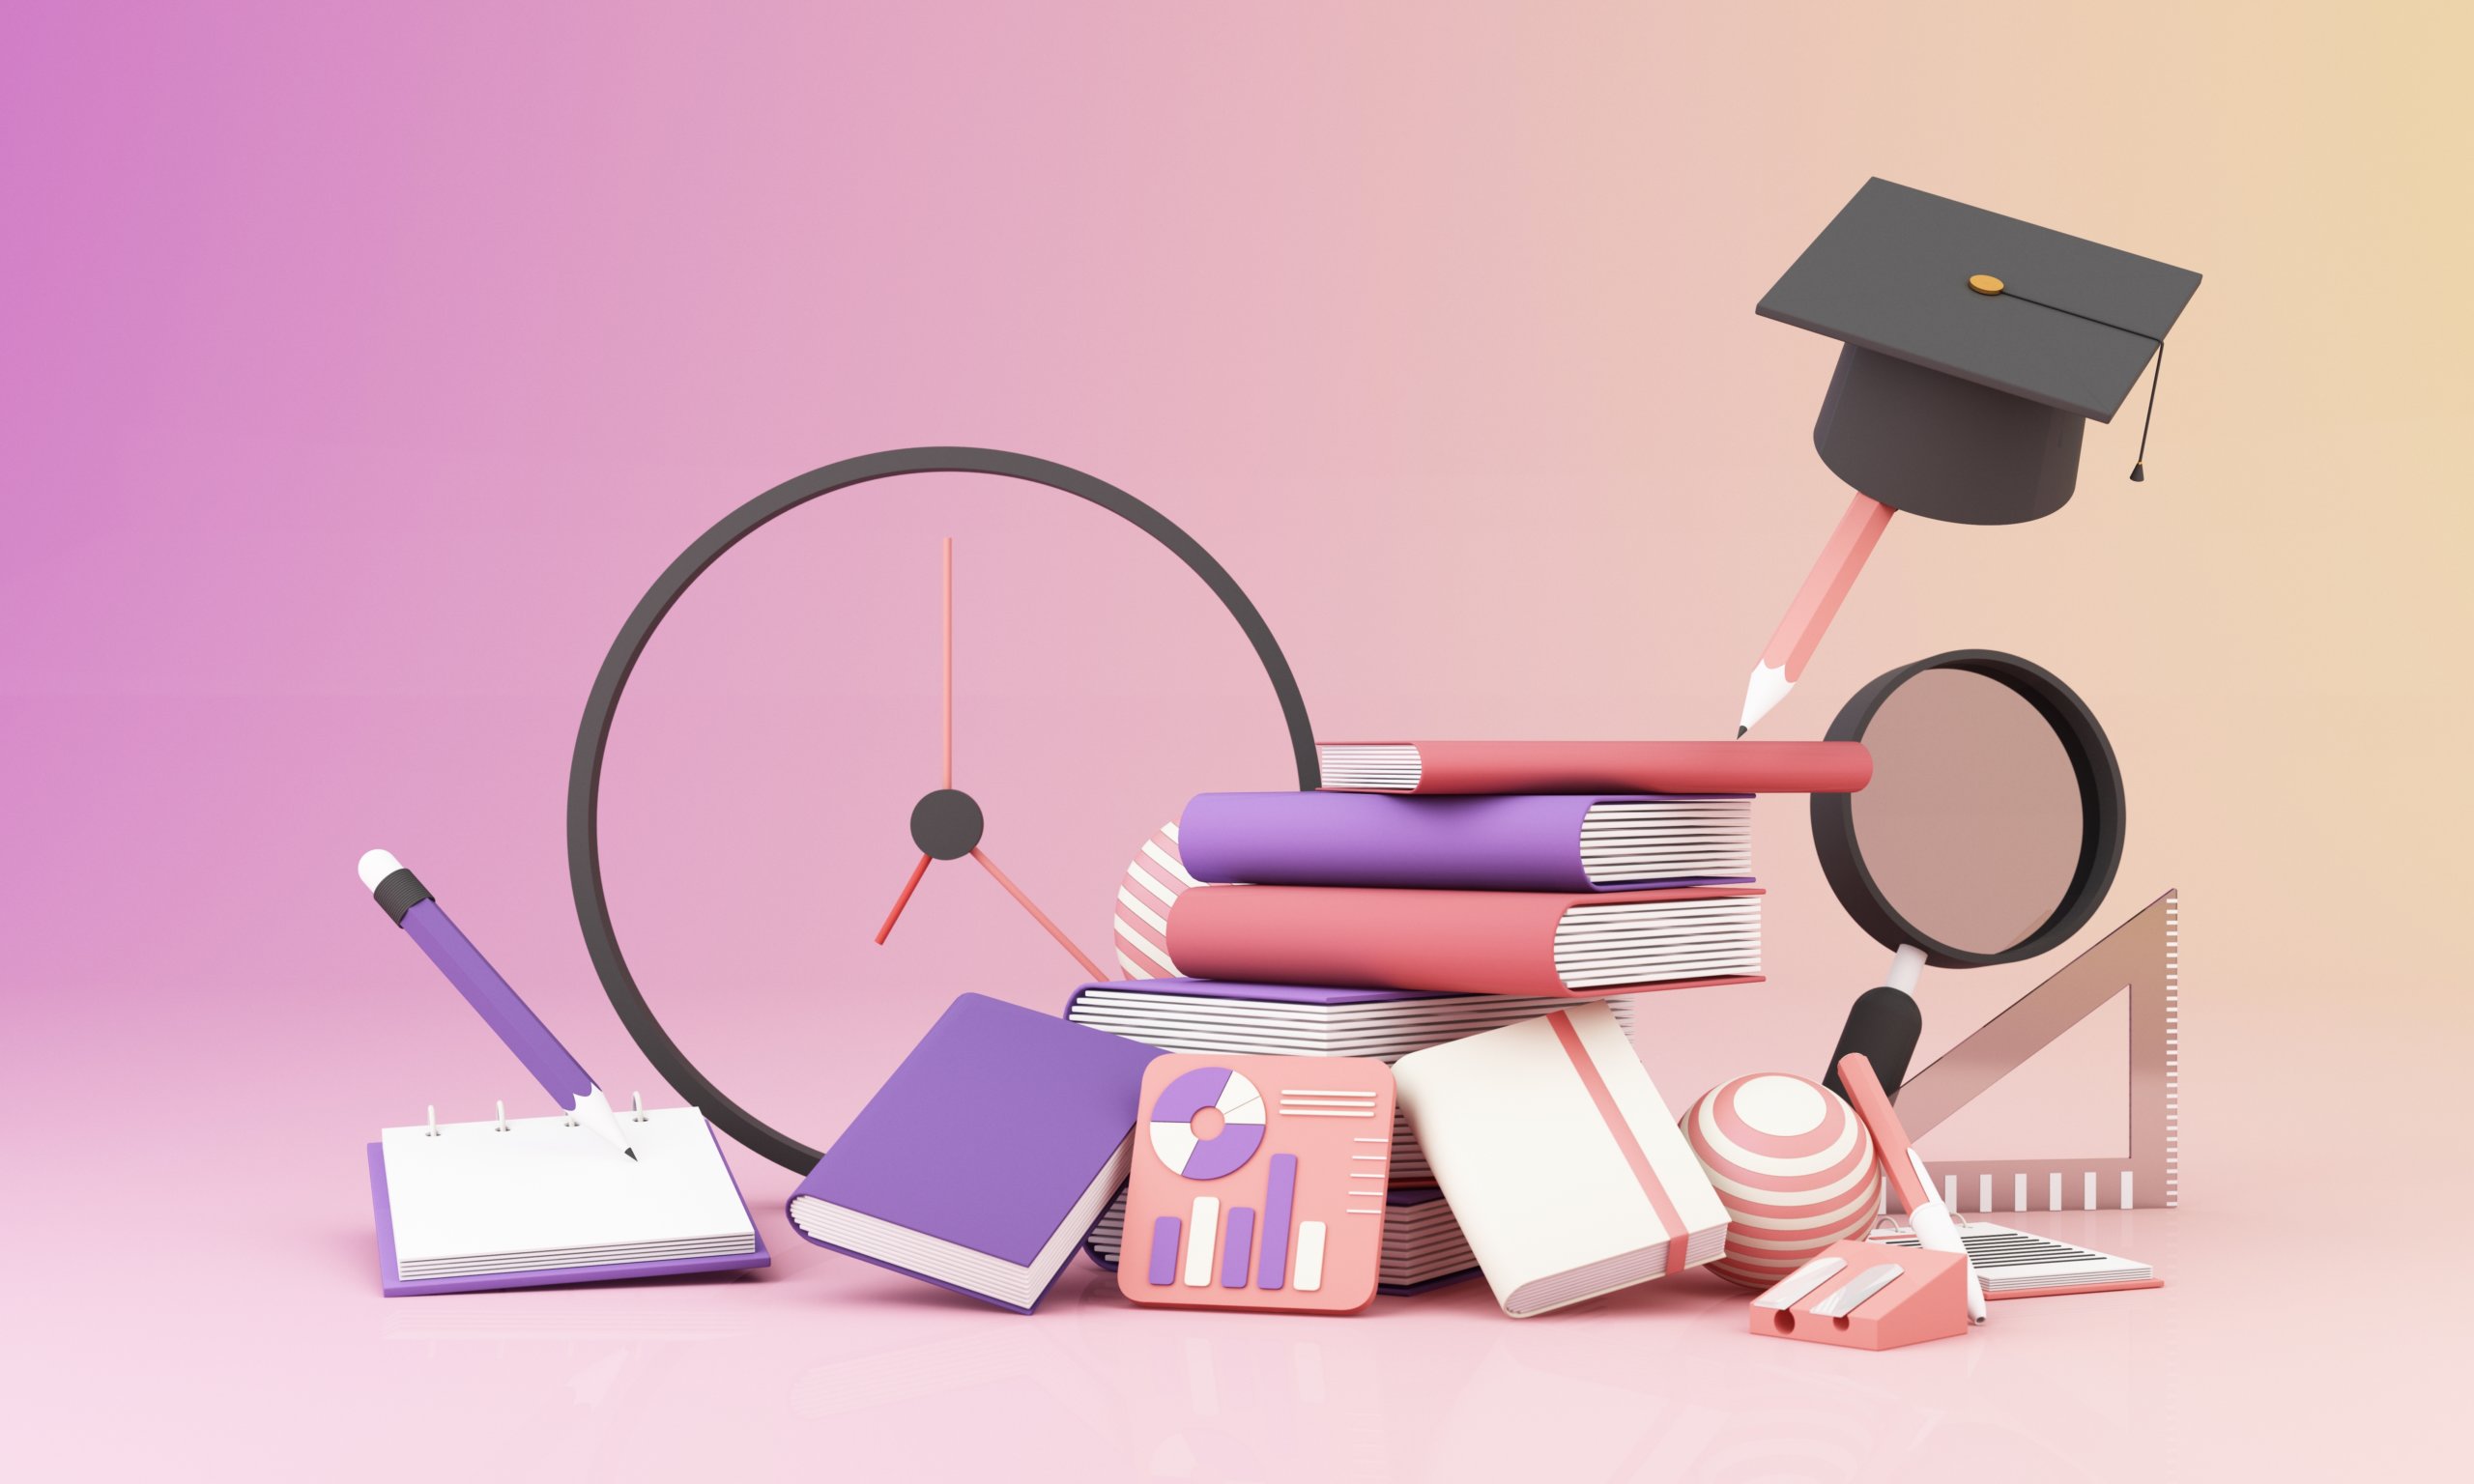 3d renderings of school supplies, pencils, books, a transparent clock, graduation cap, magnifying glass, ruler, and protractor are piled up against a purple and yellow gradient background.